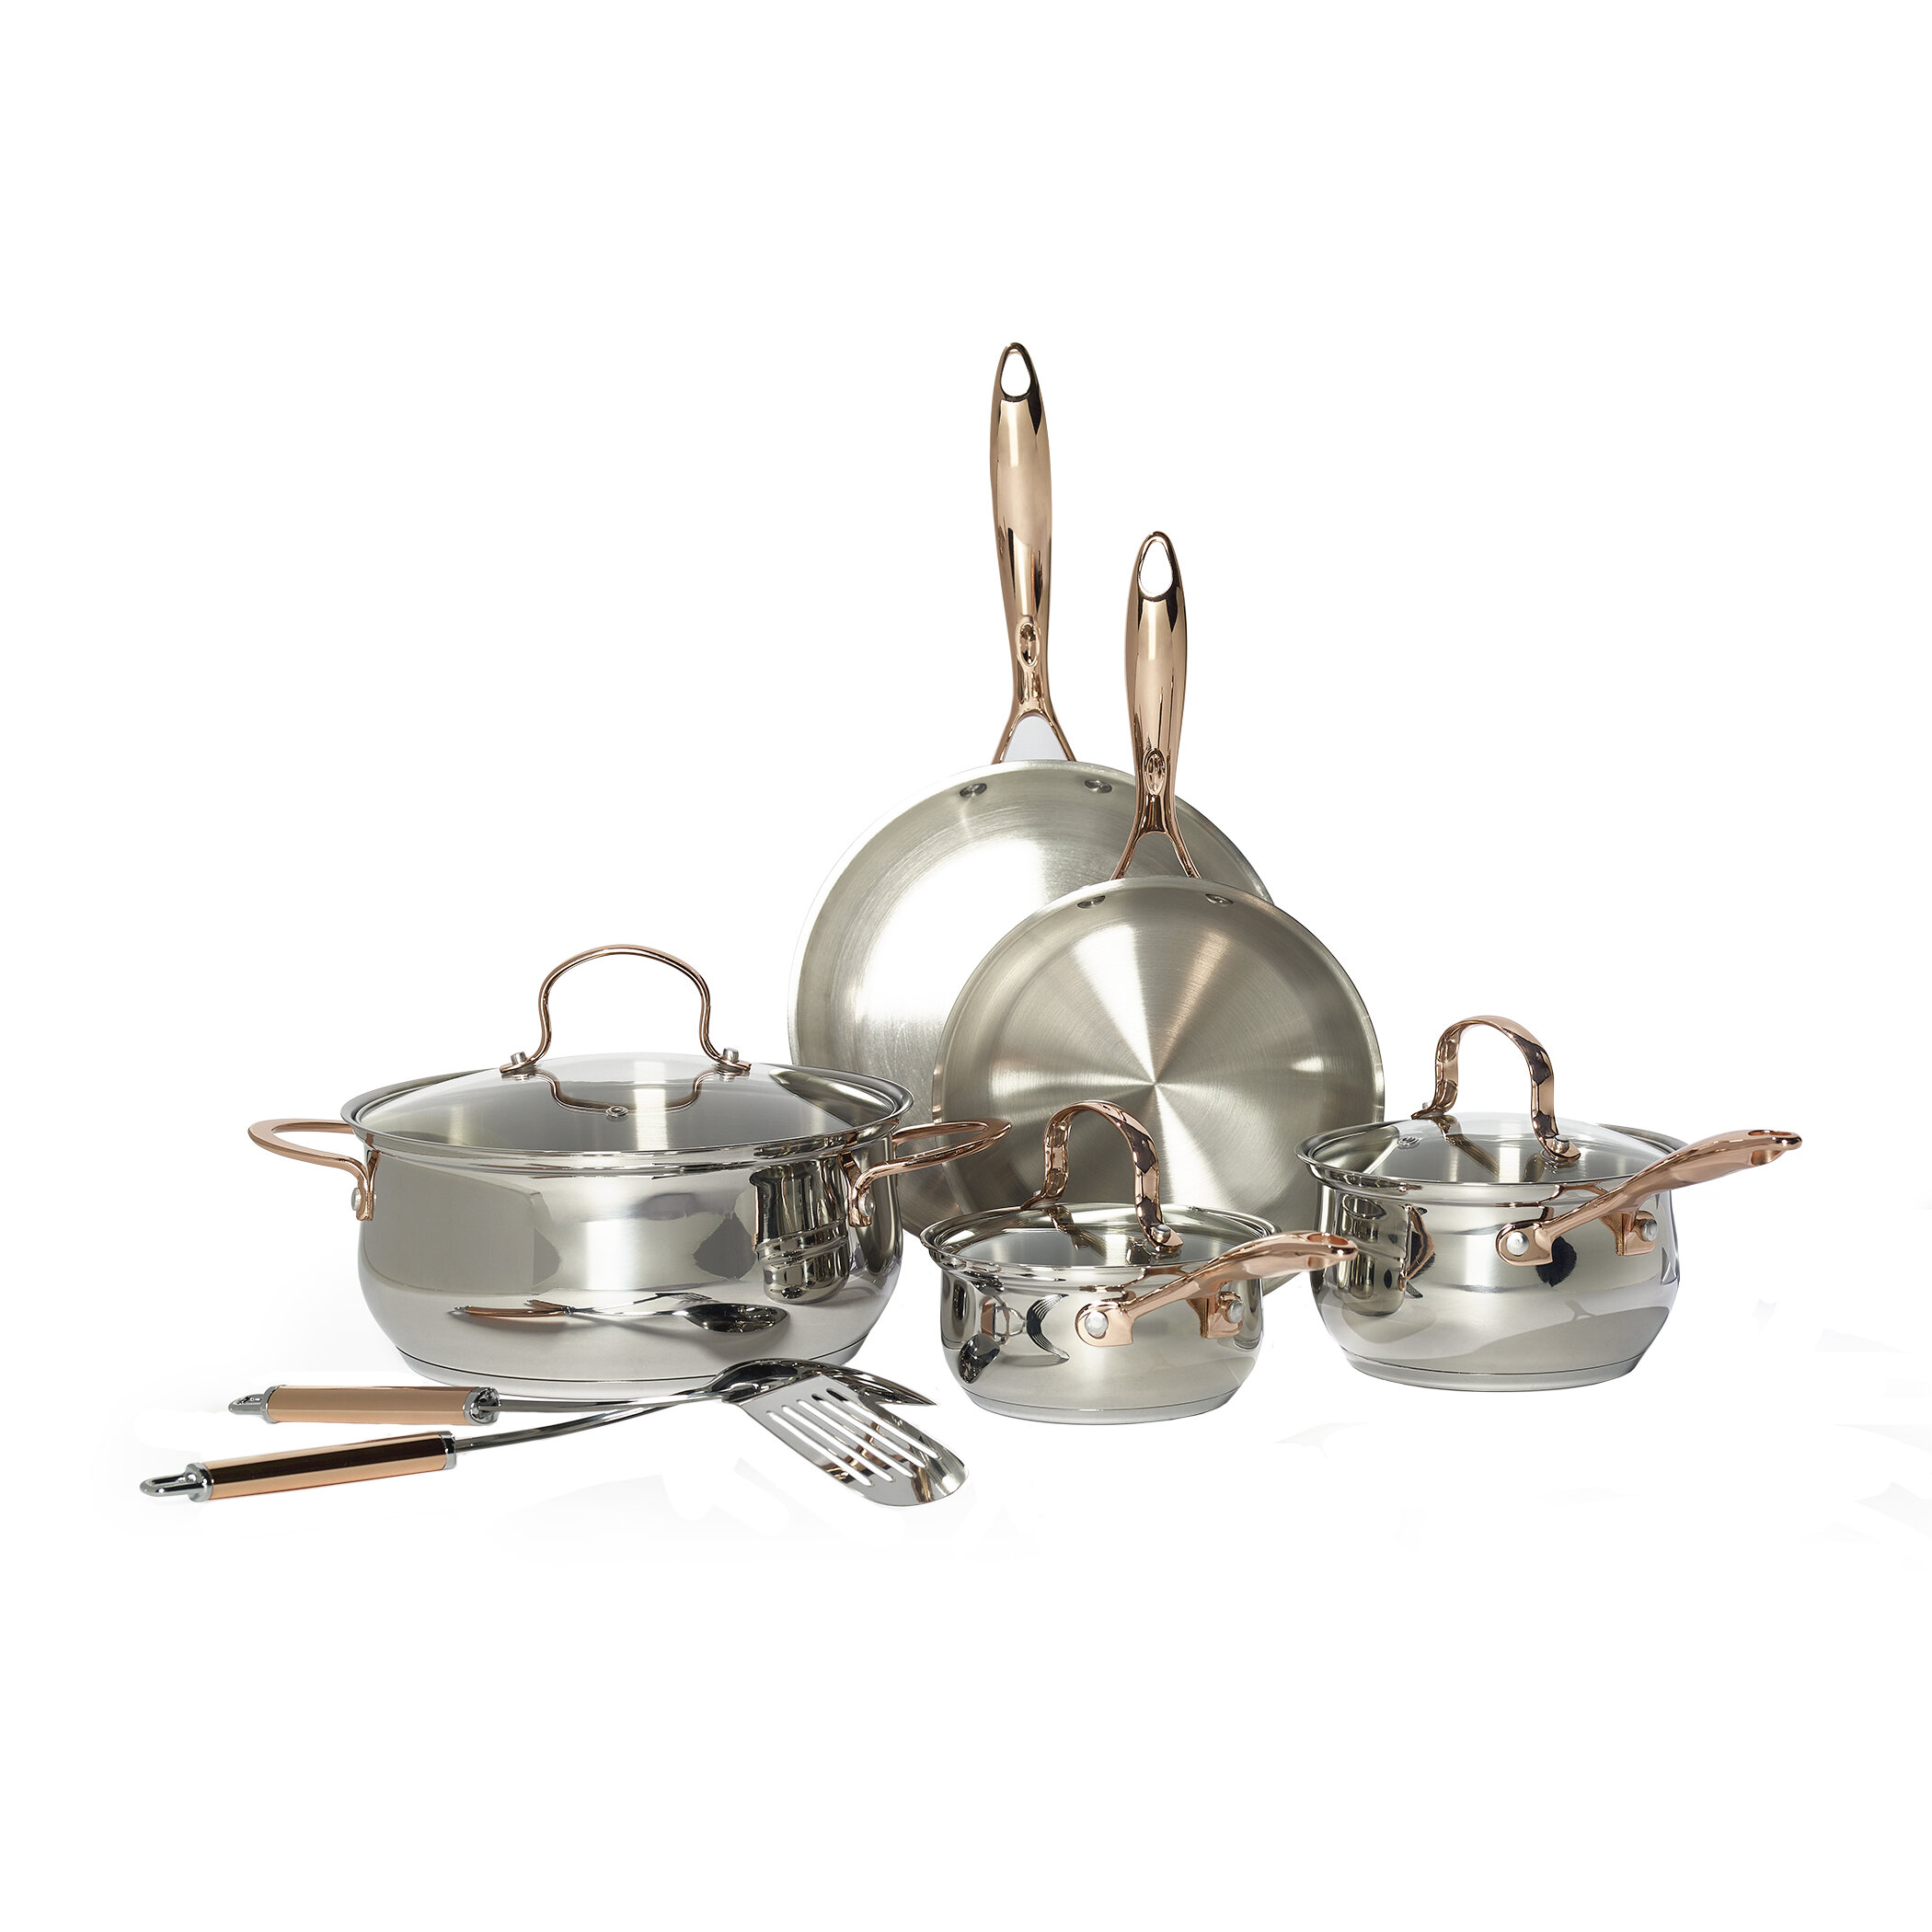 Cookware Set Stainless Steel 10-Piece Pots Pans And Utensils Oven Safe  Cooking